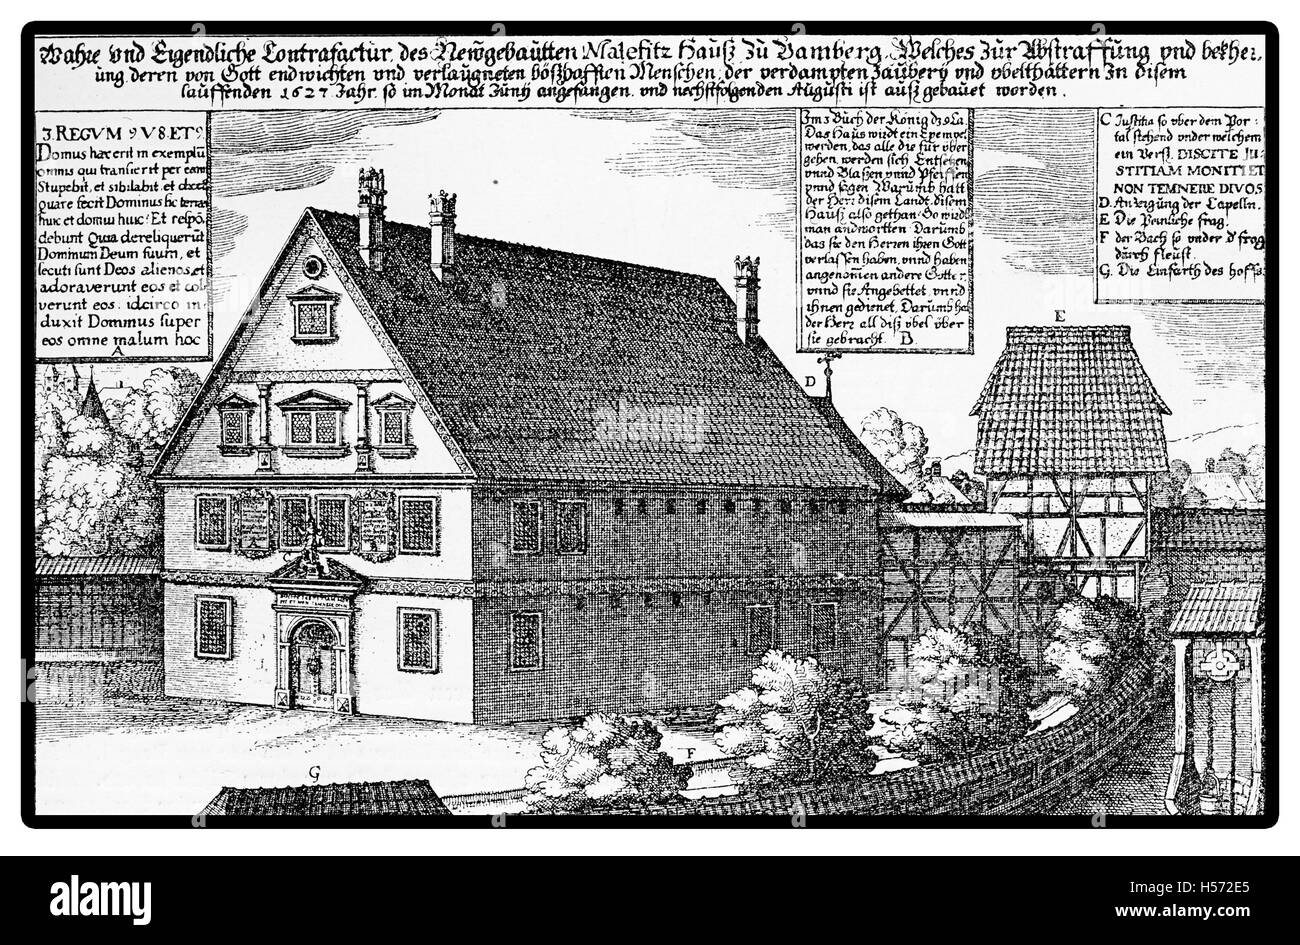 The Malefiz House in Bamberg was built in 1627 by Prince Bishop Johann George II and was a torture jail of the Catholic Inquisition. The monumental building looked like a church Stock Photo